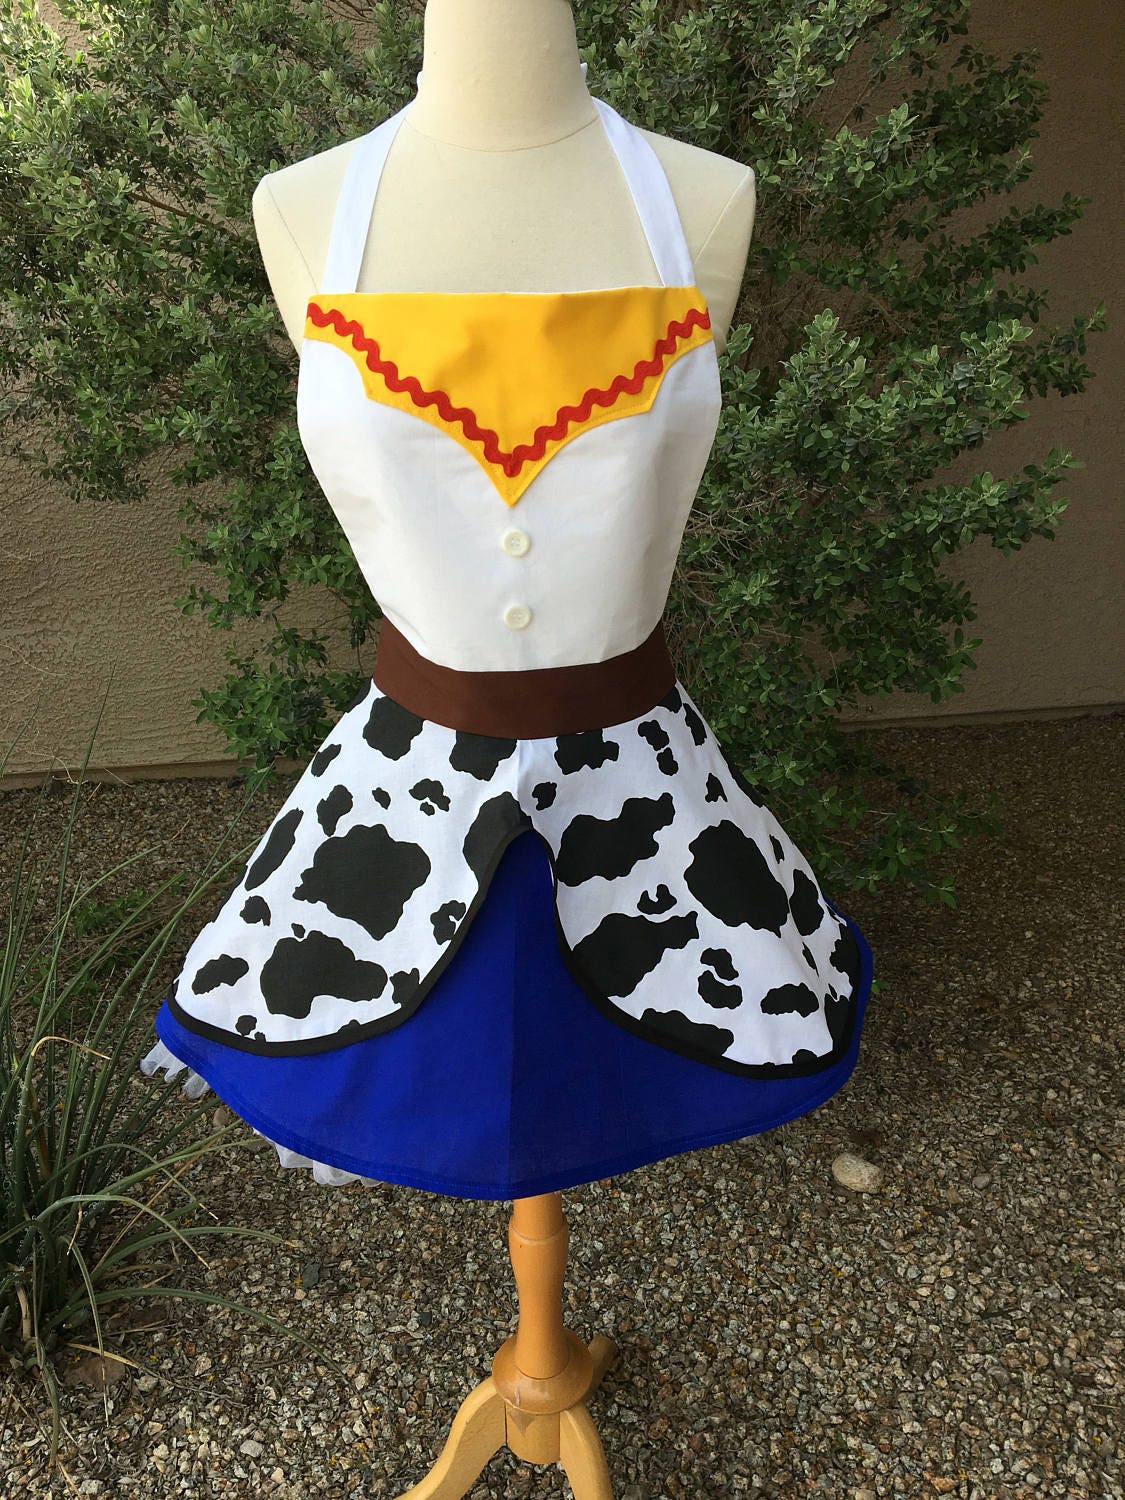 Jessie Toy Story Costume Apron, Cow Girl Halloween Costume, Toy Story  Cosplay, Disneybound, Woman's Apron 